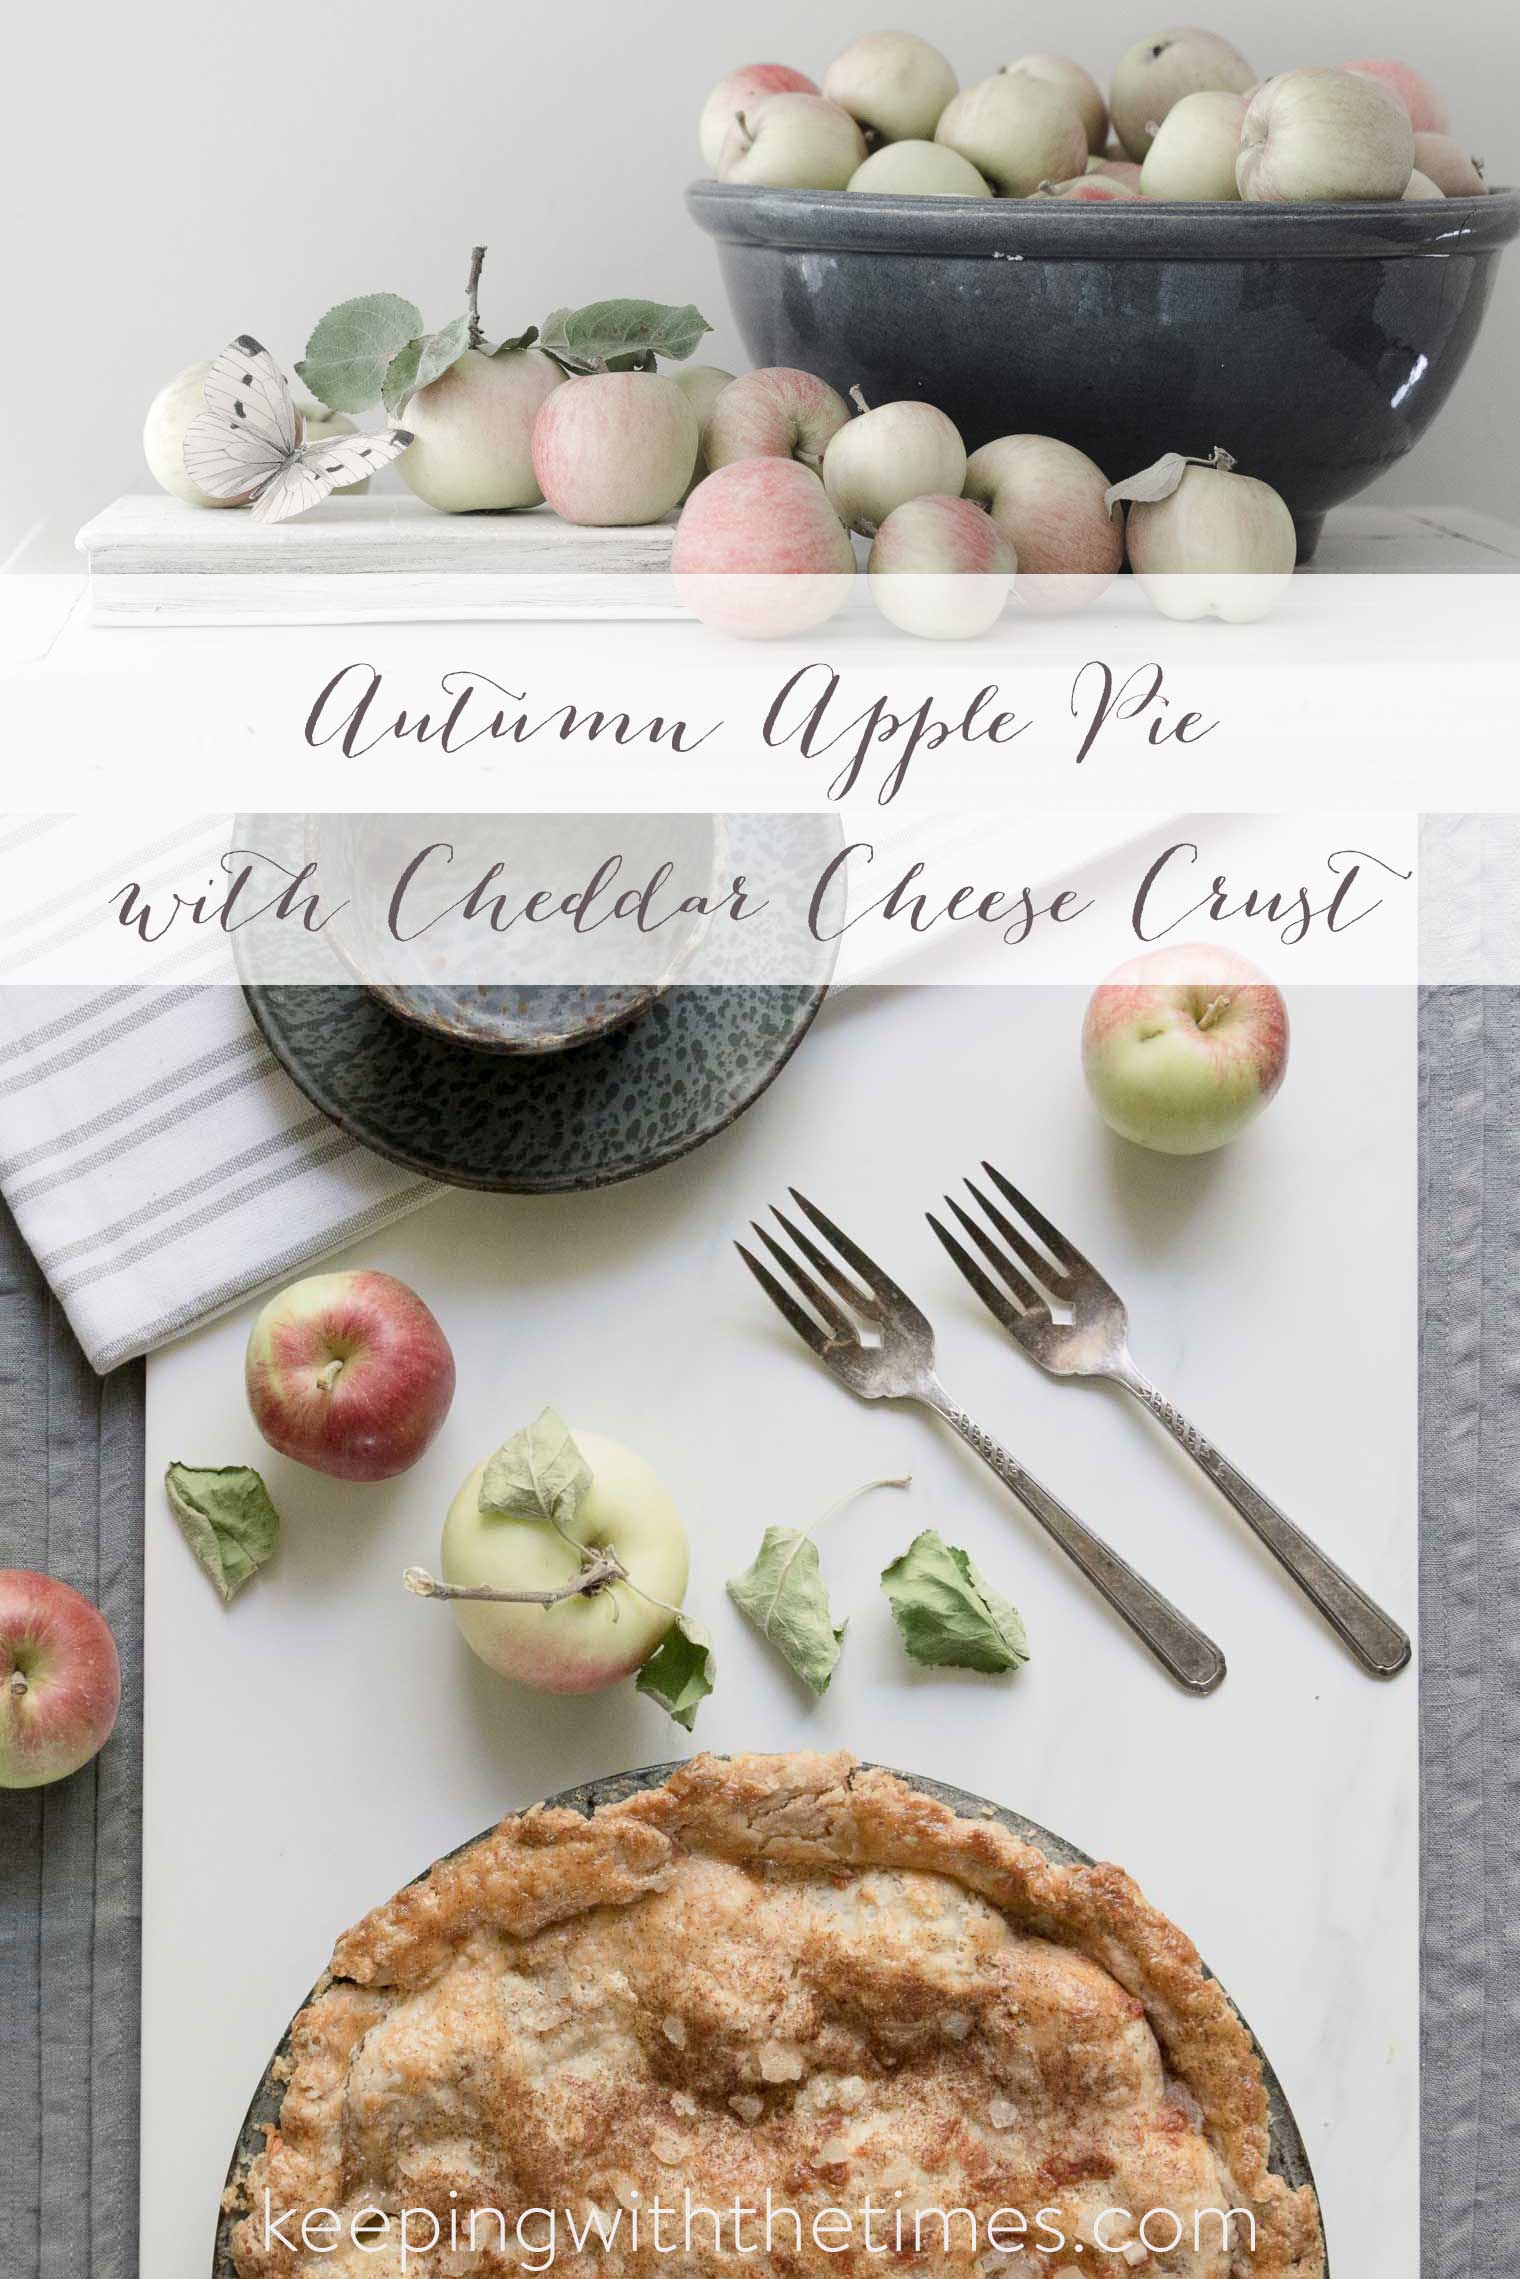 Apple Pie with Rustic Cheddar Cheese Crust, Keeping With the Times, Autumn Apples